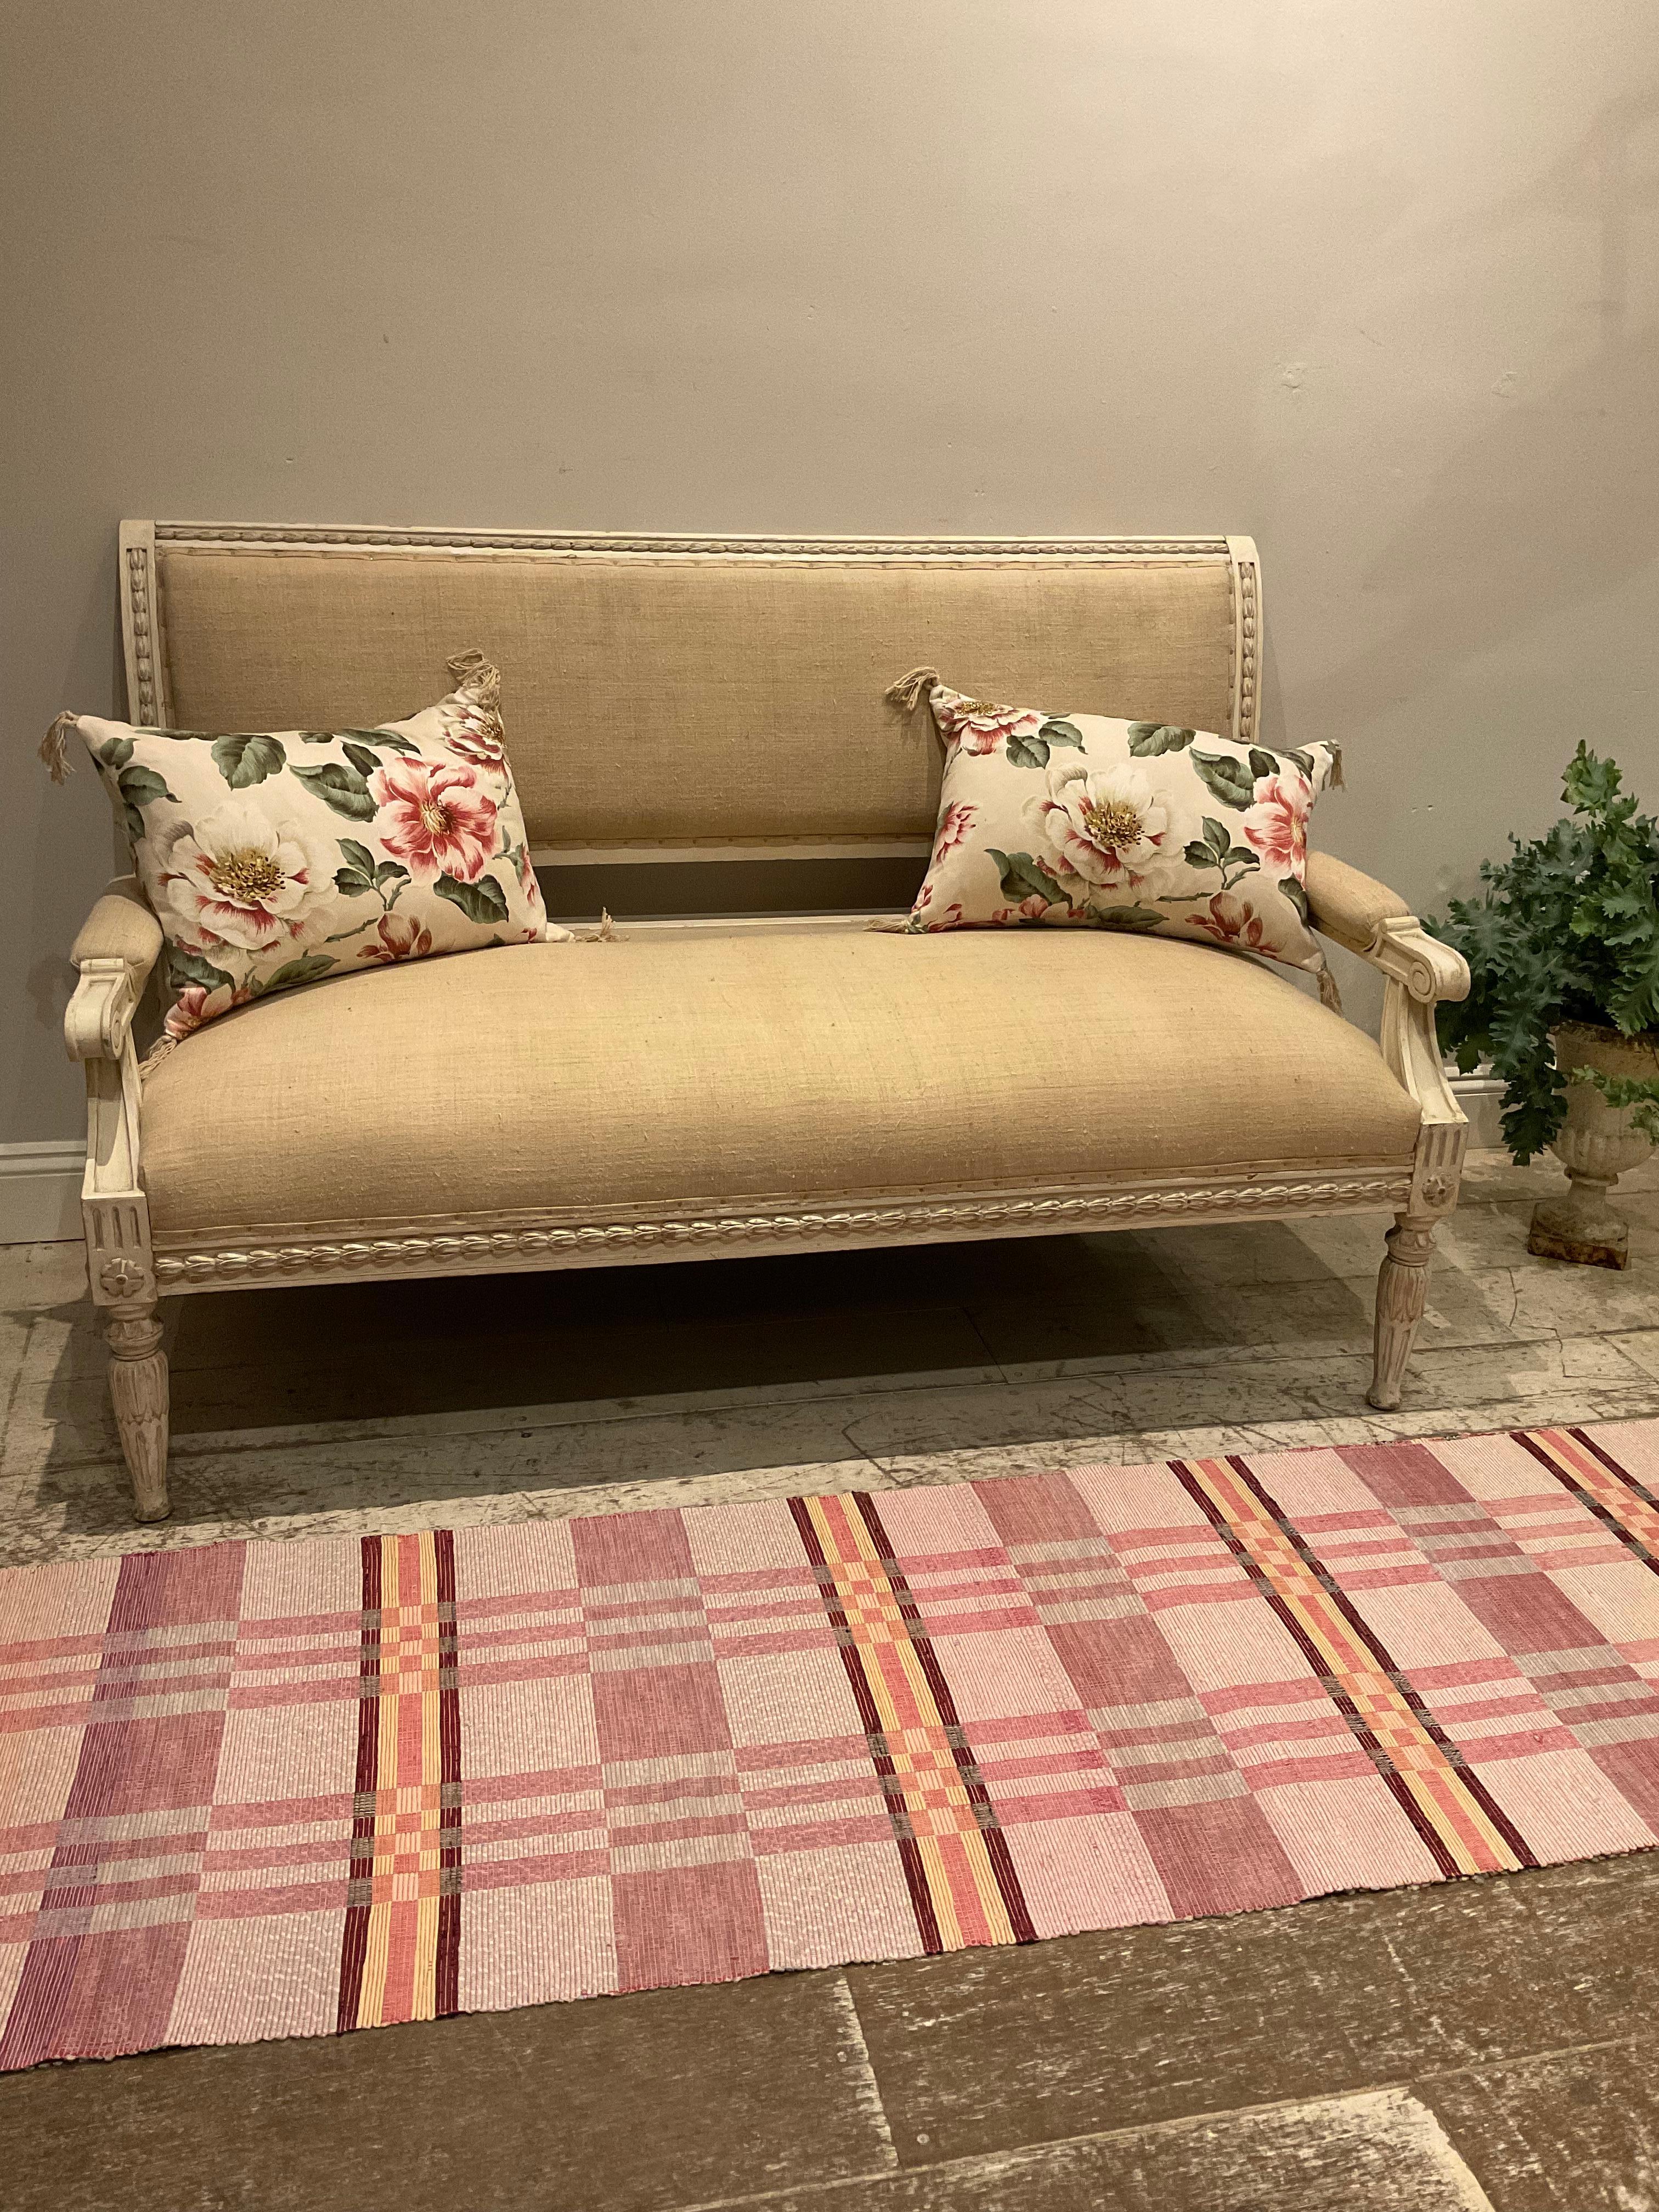 Circa 1890s Swedish Painted Sofa Gustavian Style Upholstered in a French Linen 5